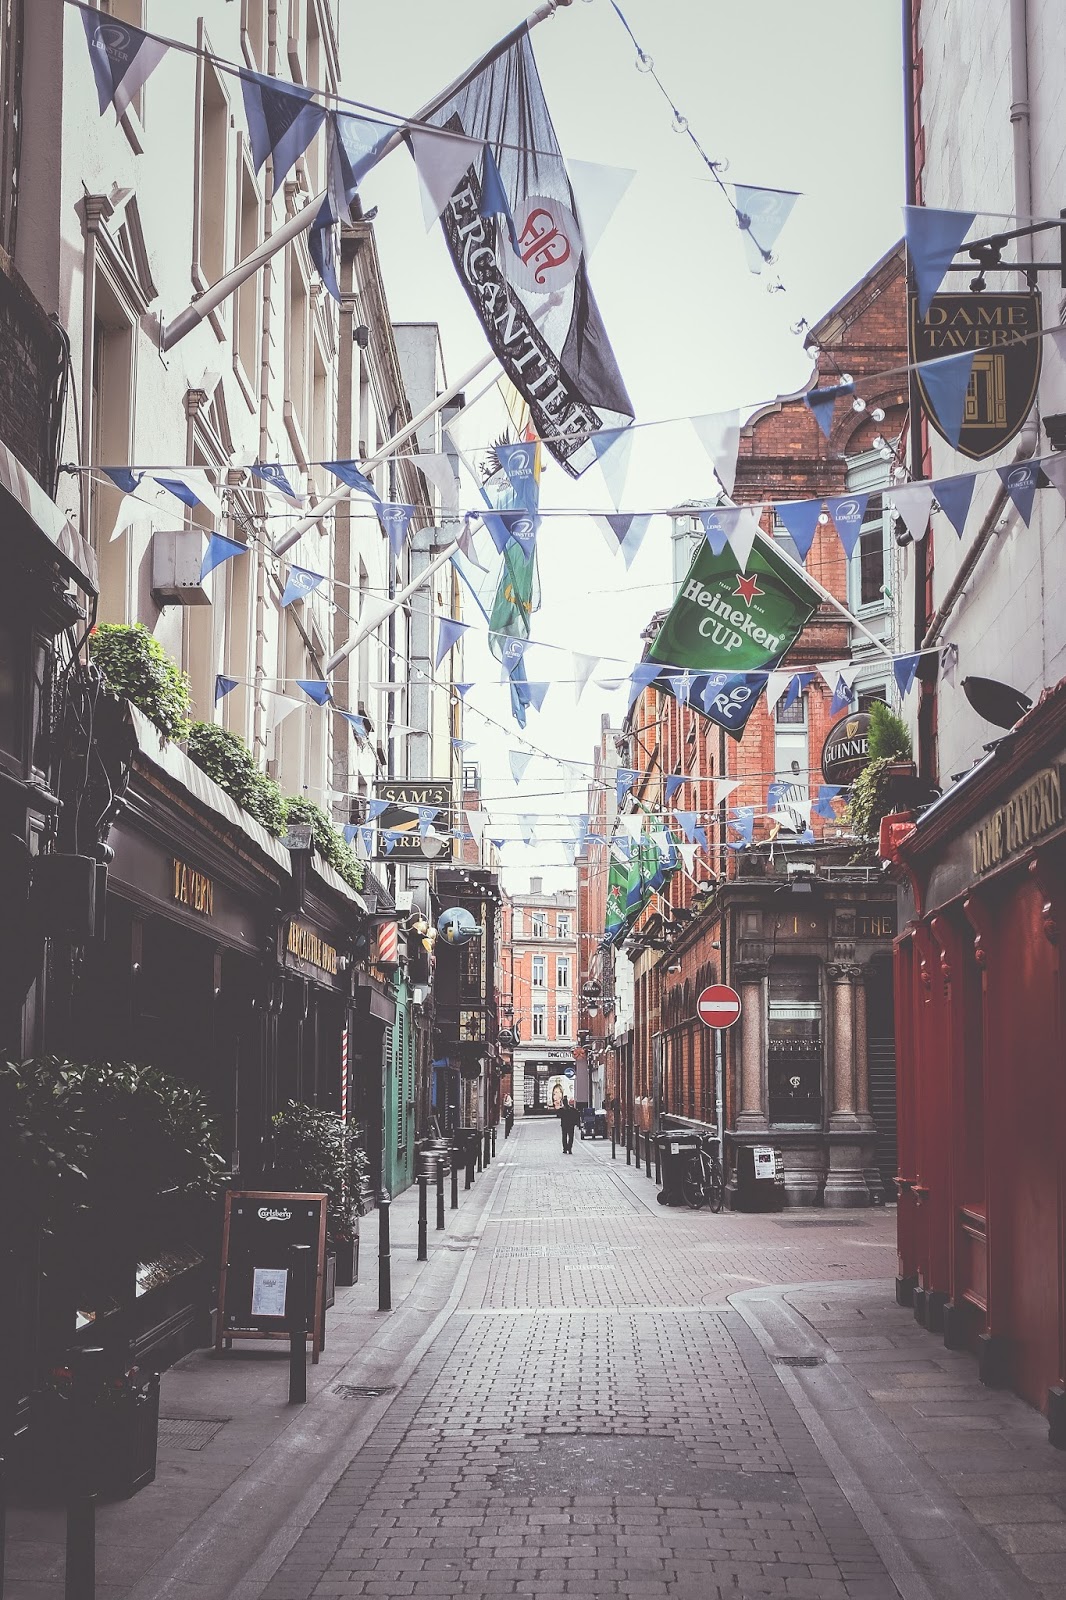 gaborimages - Gabor Nagy Photography: More Streets of Dublin